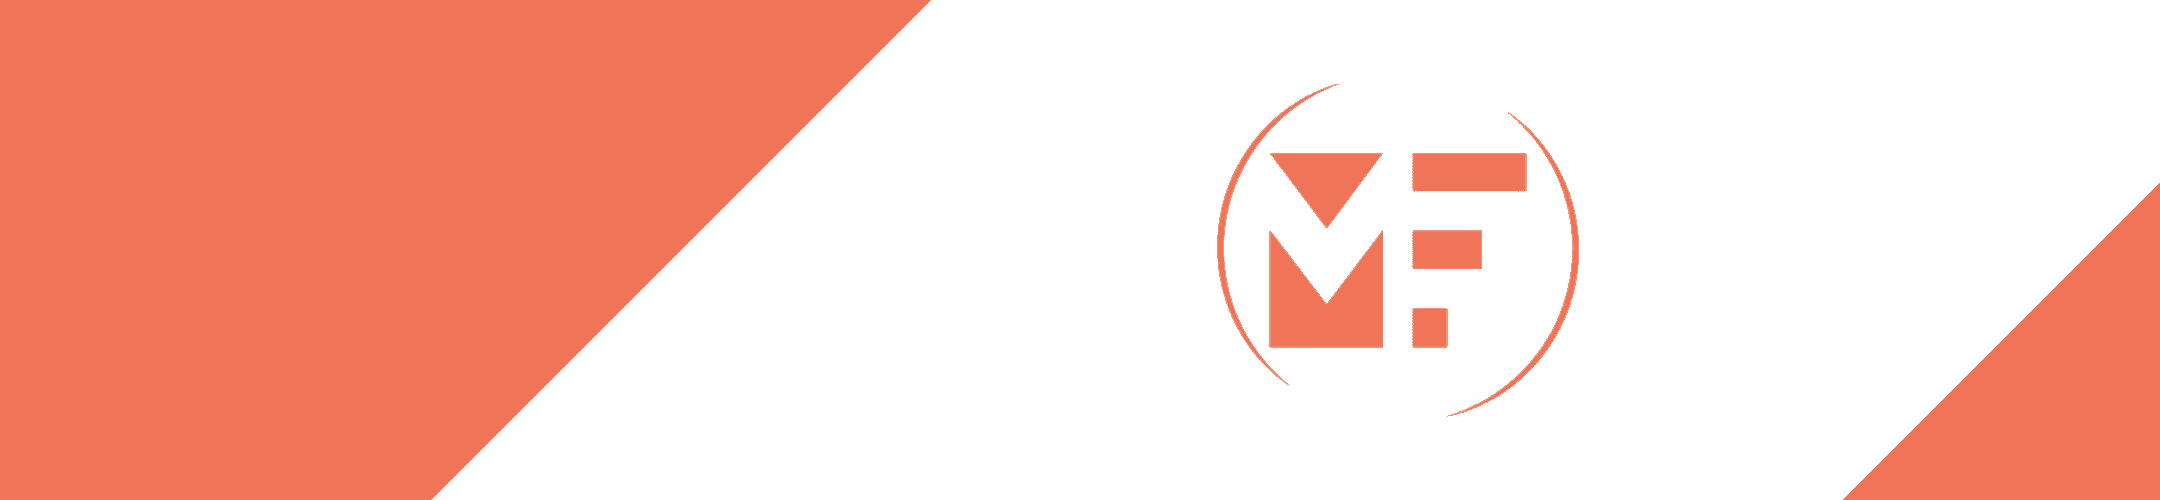 The image displays a graphic design with an abstract orange and white motif. in the center, there's a distinctive emblem or logo composed of geometric shapes that could represent the letter 'm' within an oval-like contour. the background is divided diagonally between a lighter and a darker shade of orange, creating a modern and clean appearance.